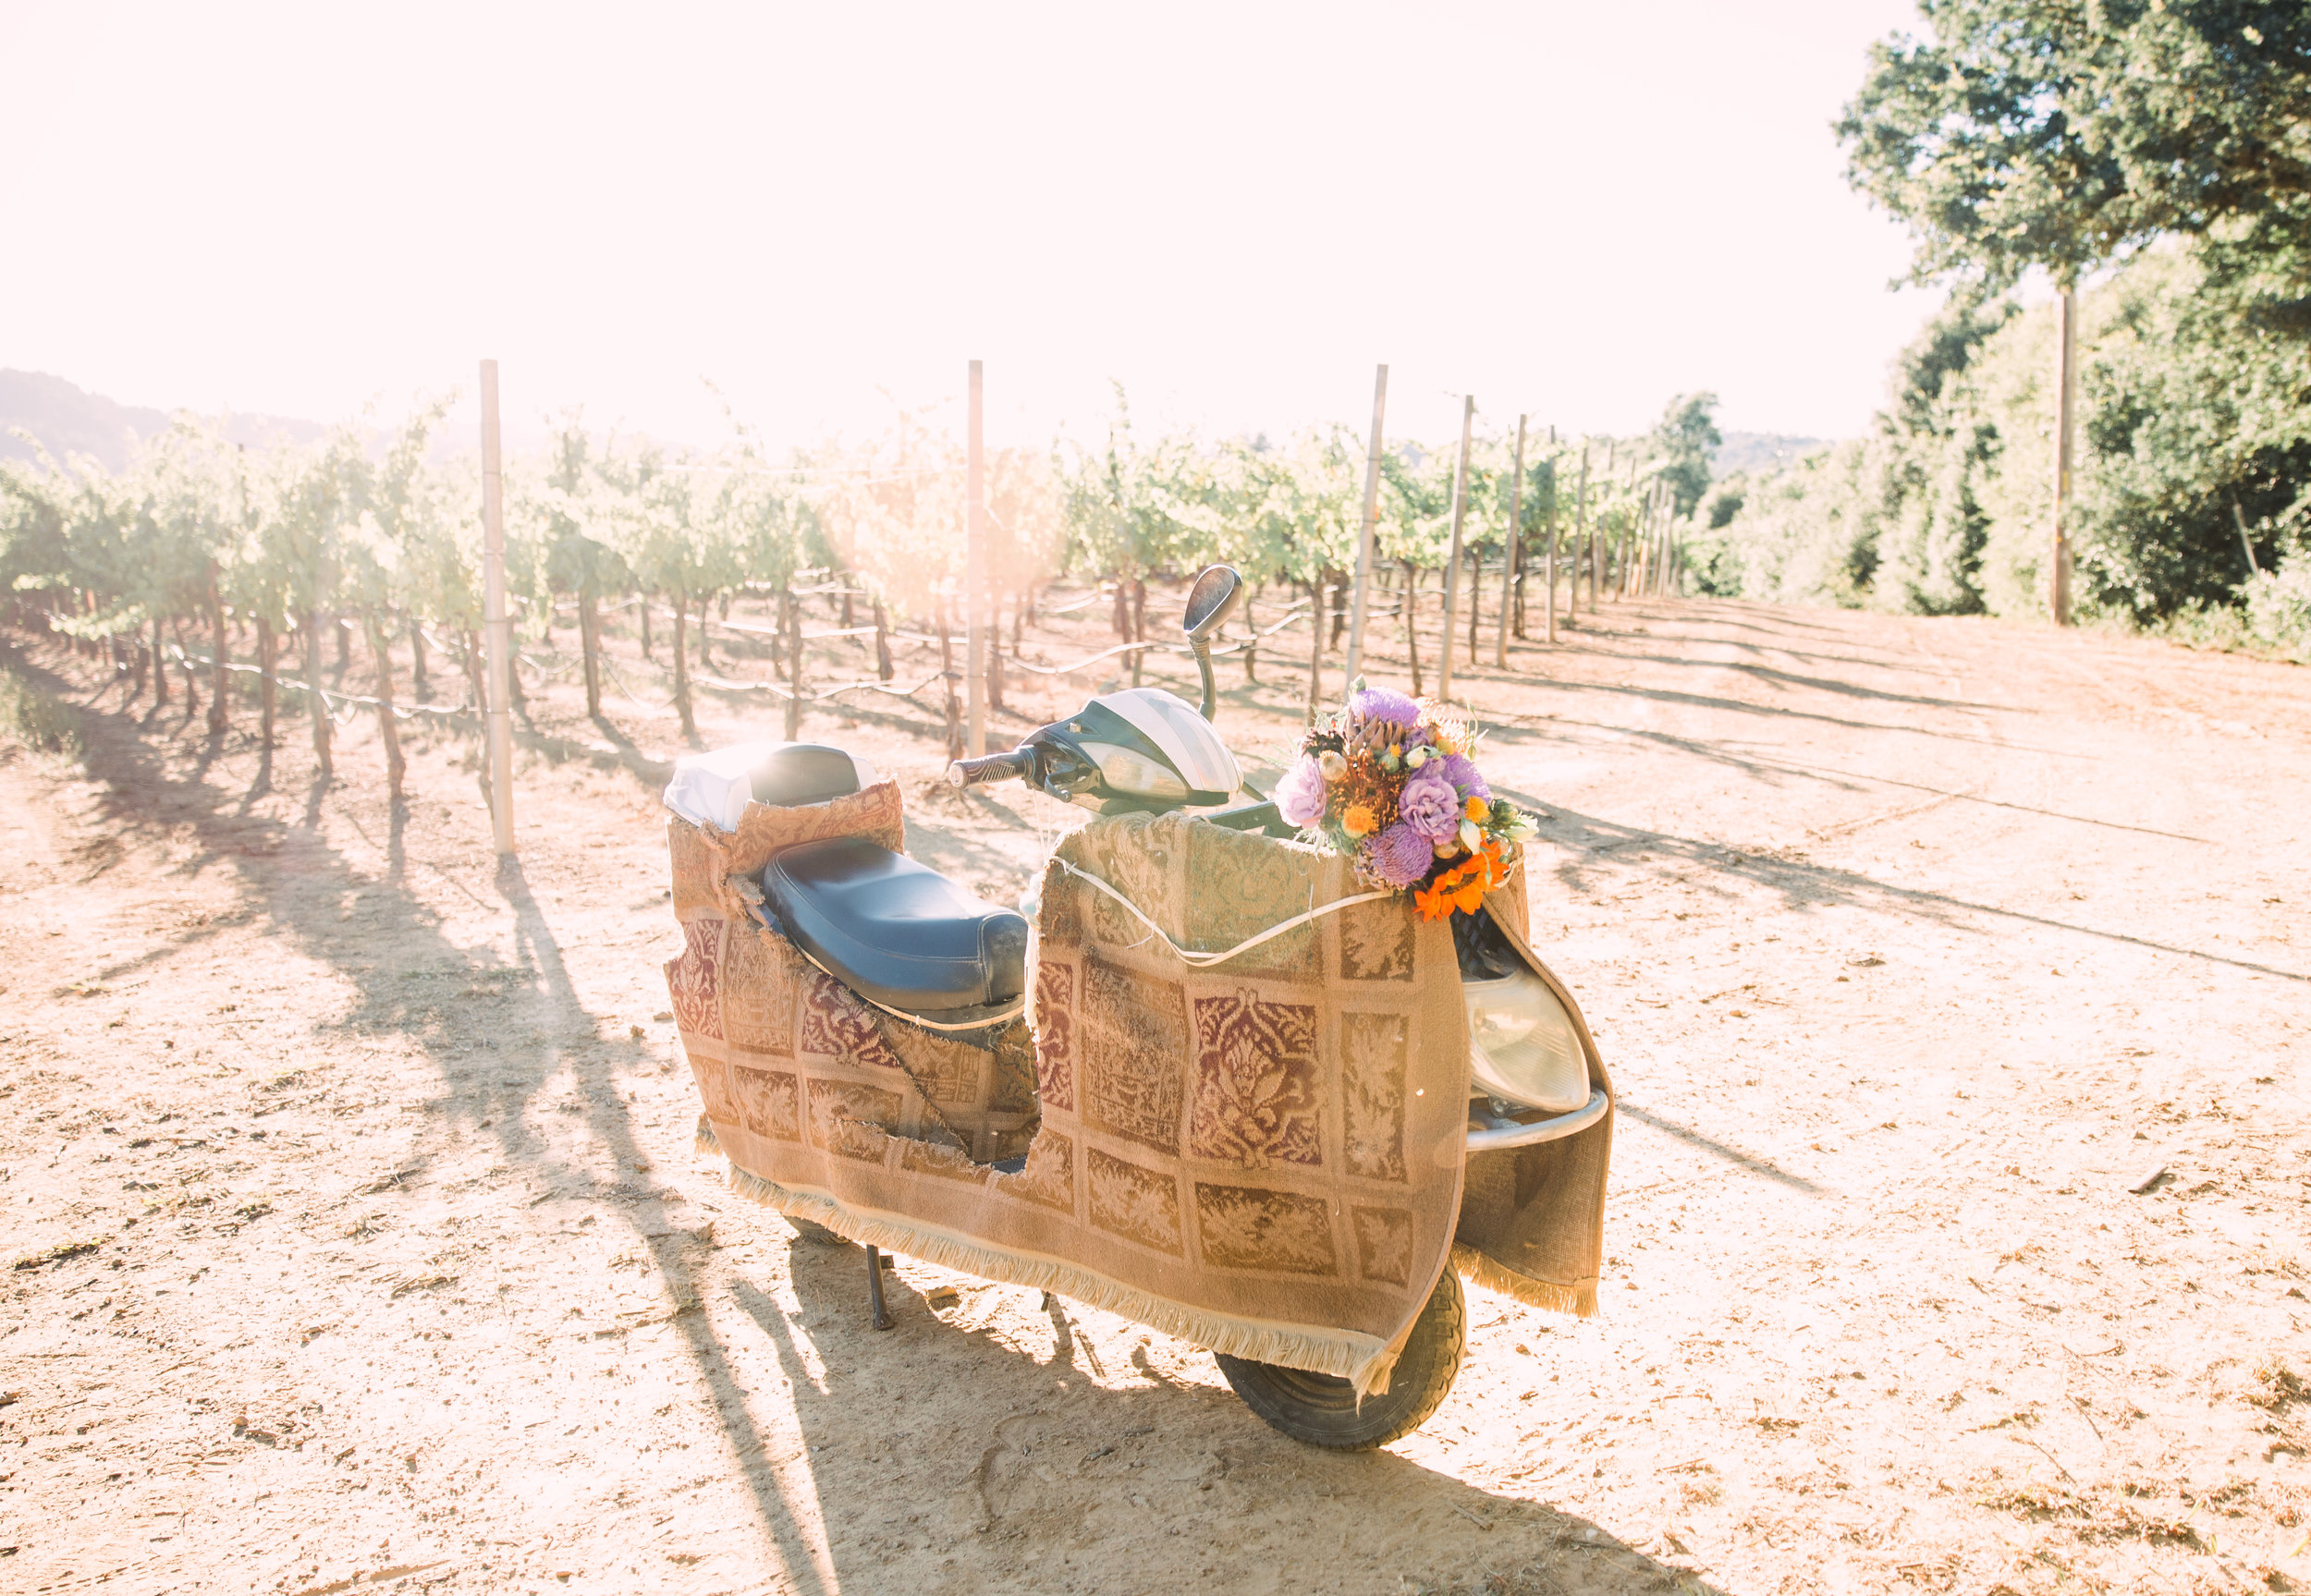 Their beloved “Scoot Scoot” which has seen many an adventure from Burning Man to, well zooming around the Vineyards on their wedding day.